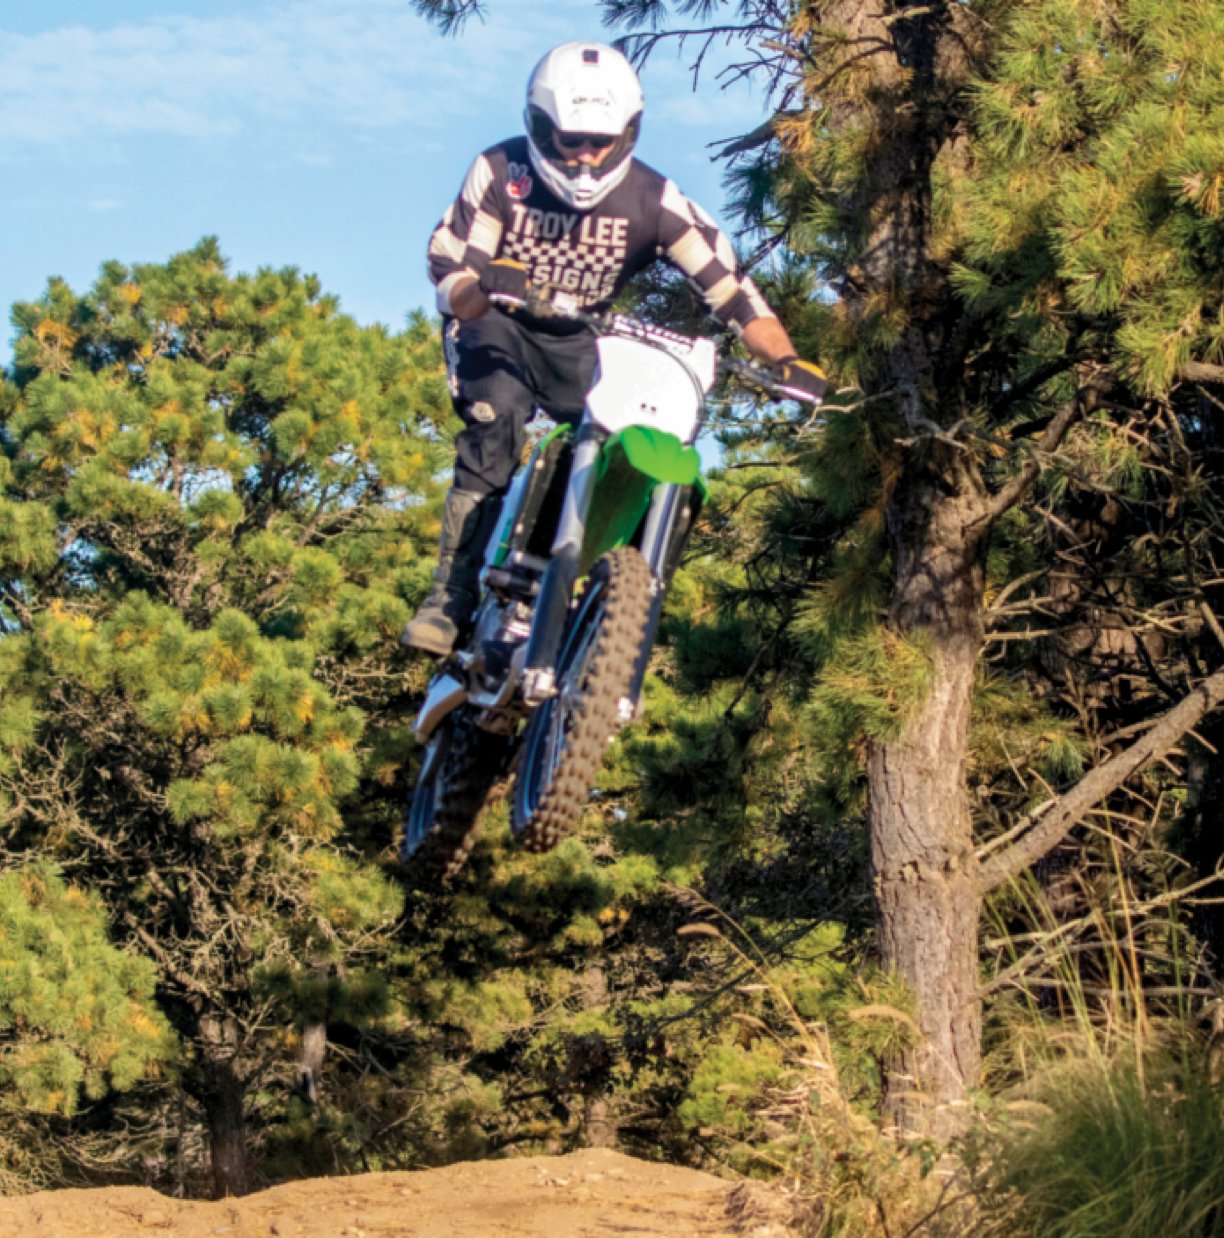 Dave Dunn goes off a jump at the Nantucket dirt bike track. Dunn spent countless hours at this track in preparation for the Baja 1000, a 1000-mile endurance race through the coastline and deserts of Baja, Mexico.